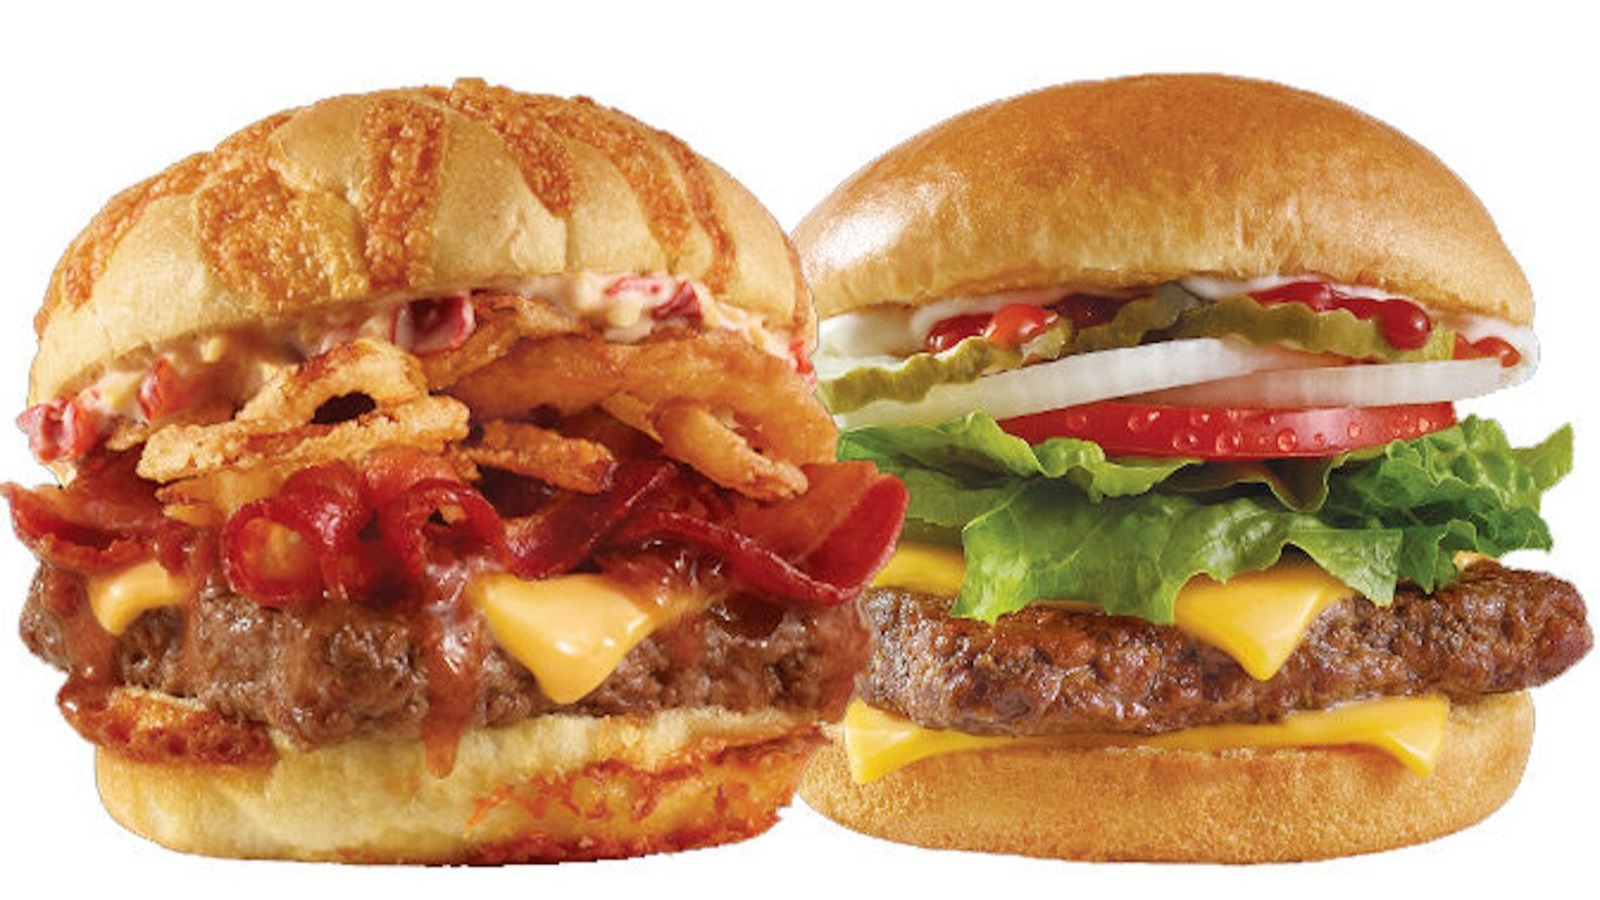 Wendy's Fans Won't Want To Miss This National Cheeseburger Day Deal